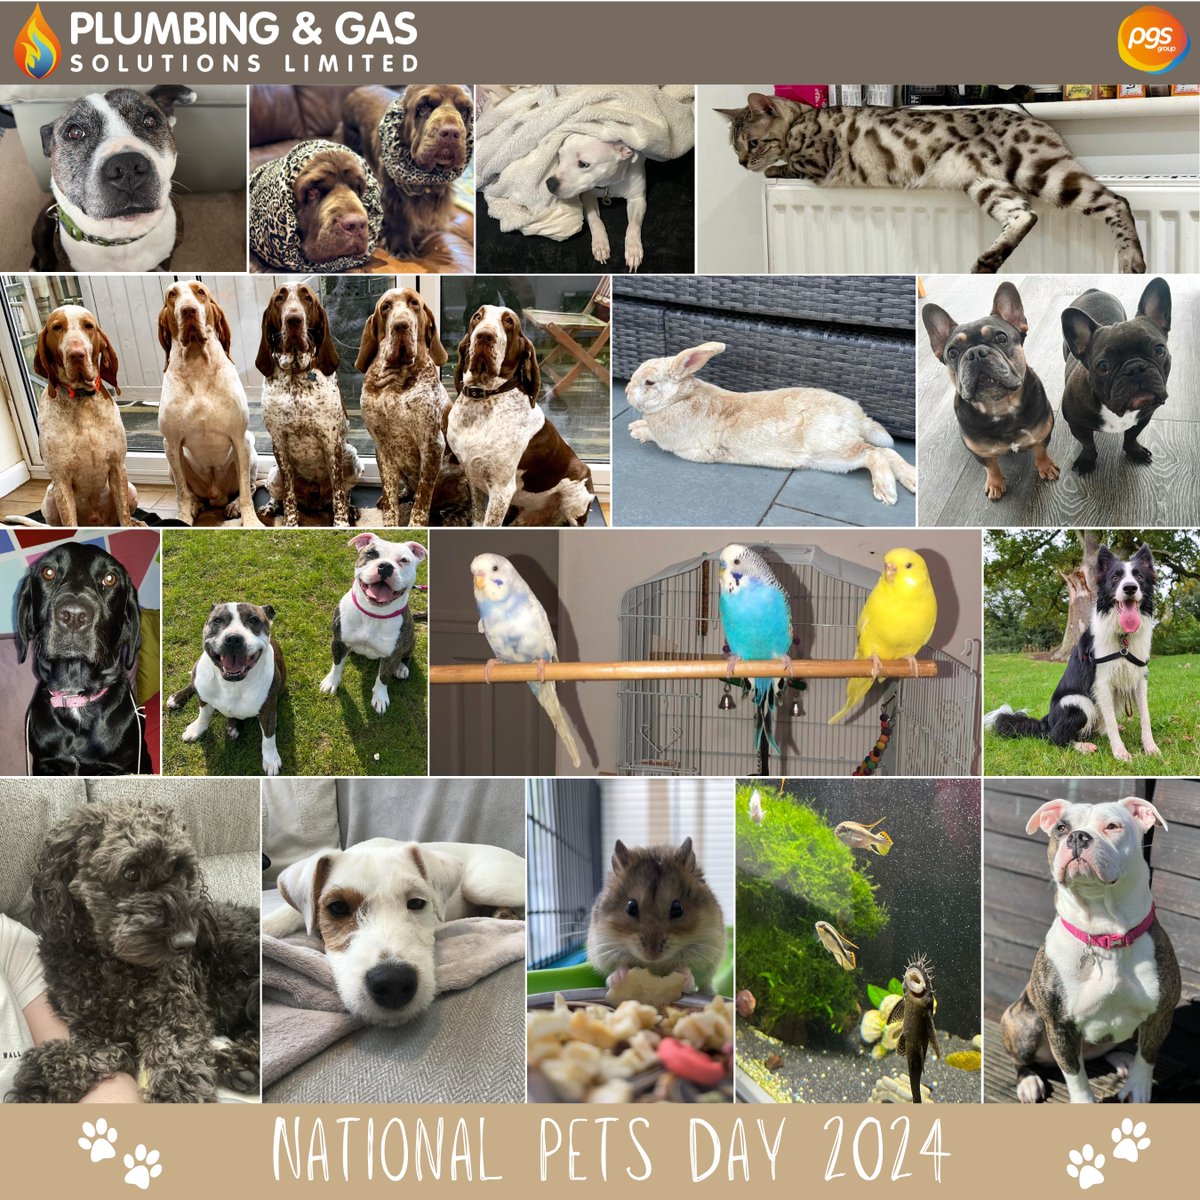 Today is #NationalPetsDay! 🐶 🐈 We asked all of the PGS group team to send in a picture of their pets and this was the result. 📸 As you can see we have quite the zoo between all of us! 🦁 🦓 🐯 #NationalPetsDay2024 #PGSGroup